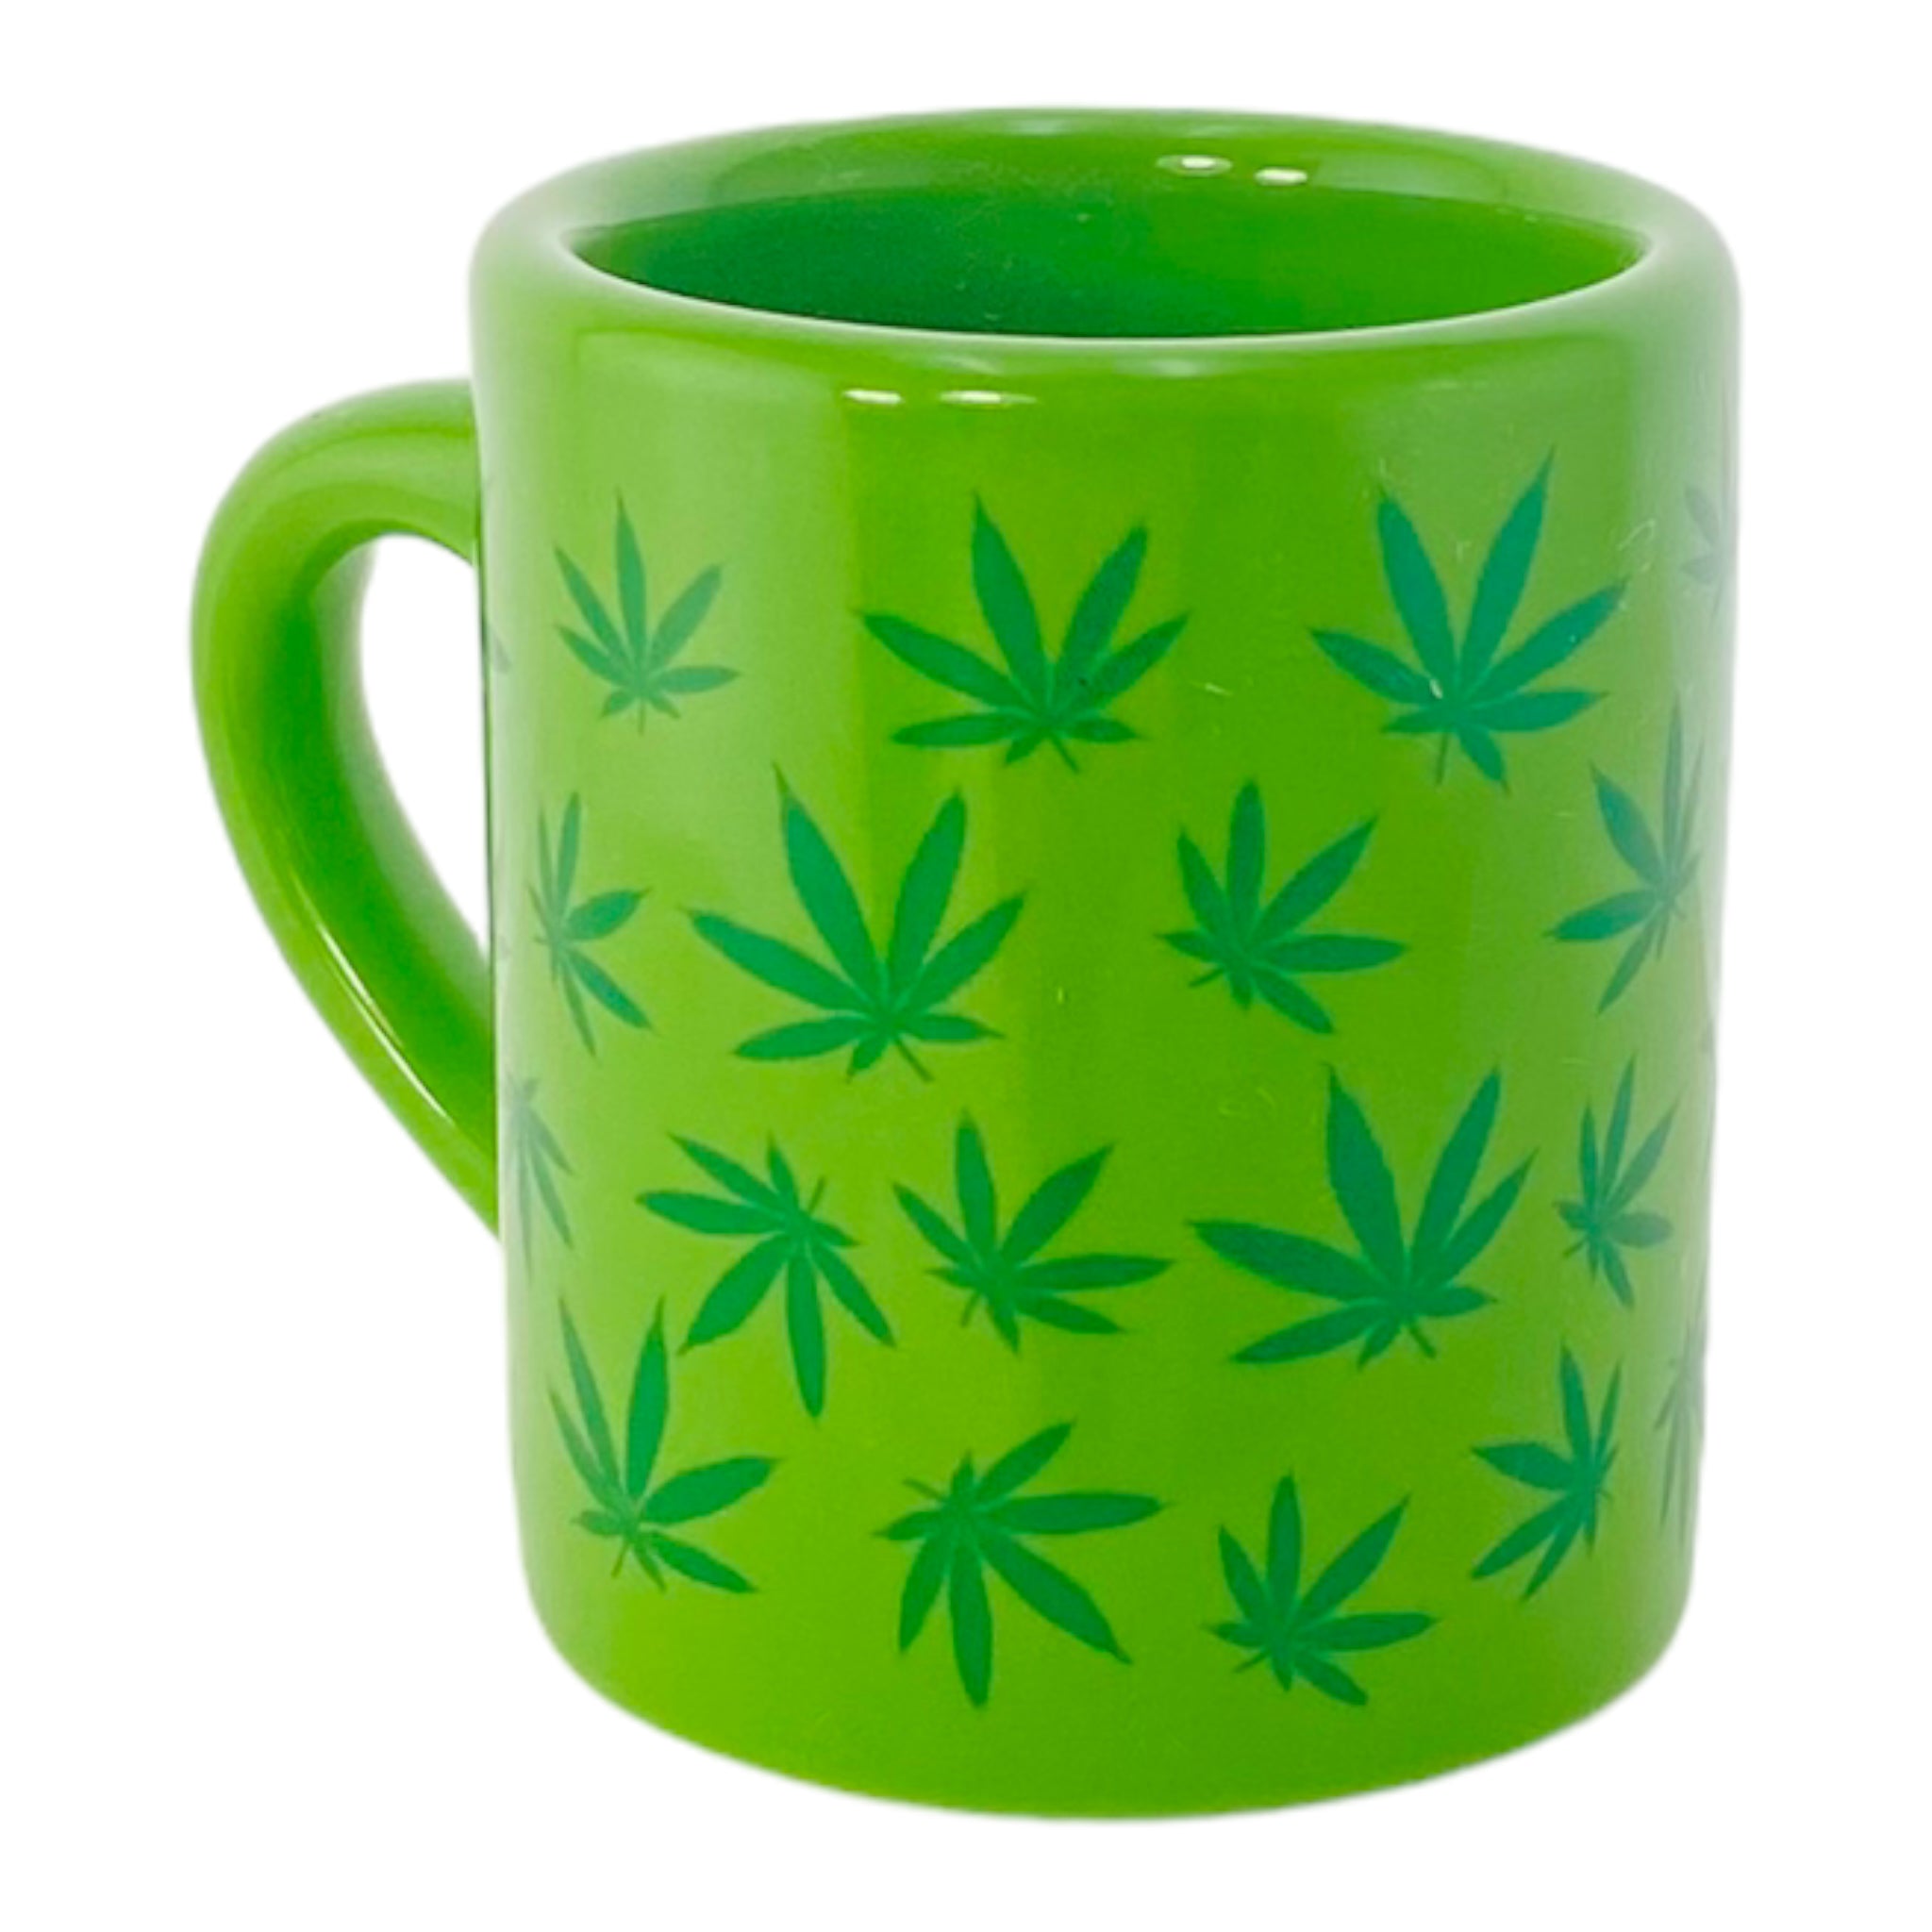 Mini Green Coffee Cup Q-Tip Holder With Weed Leaves